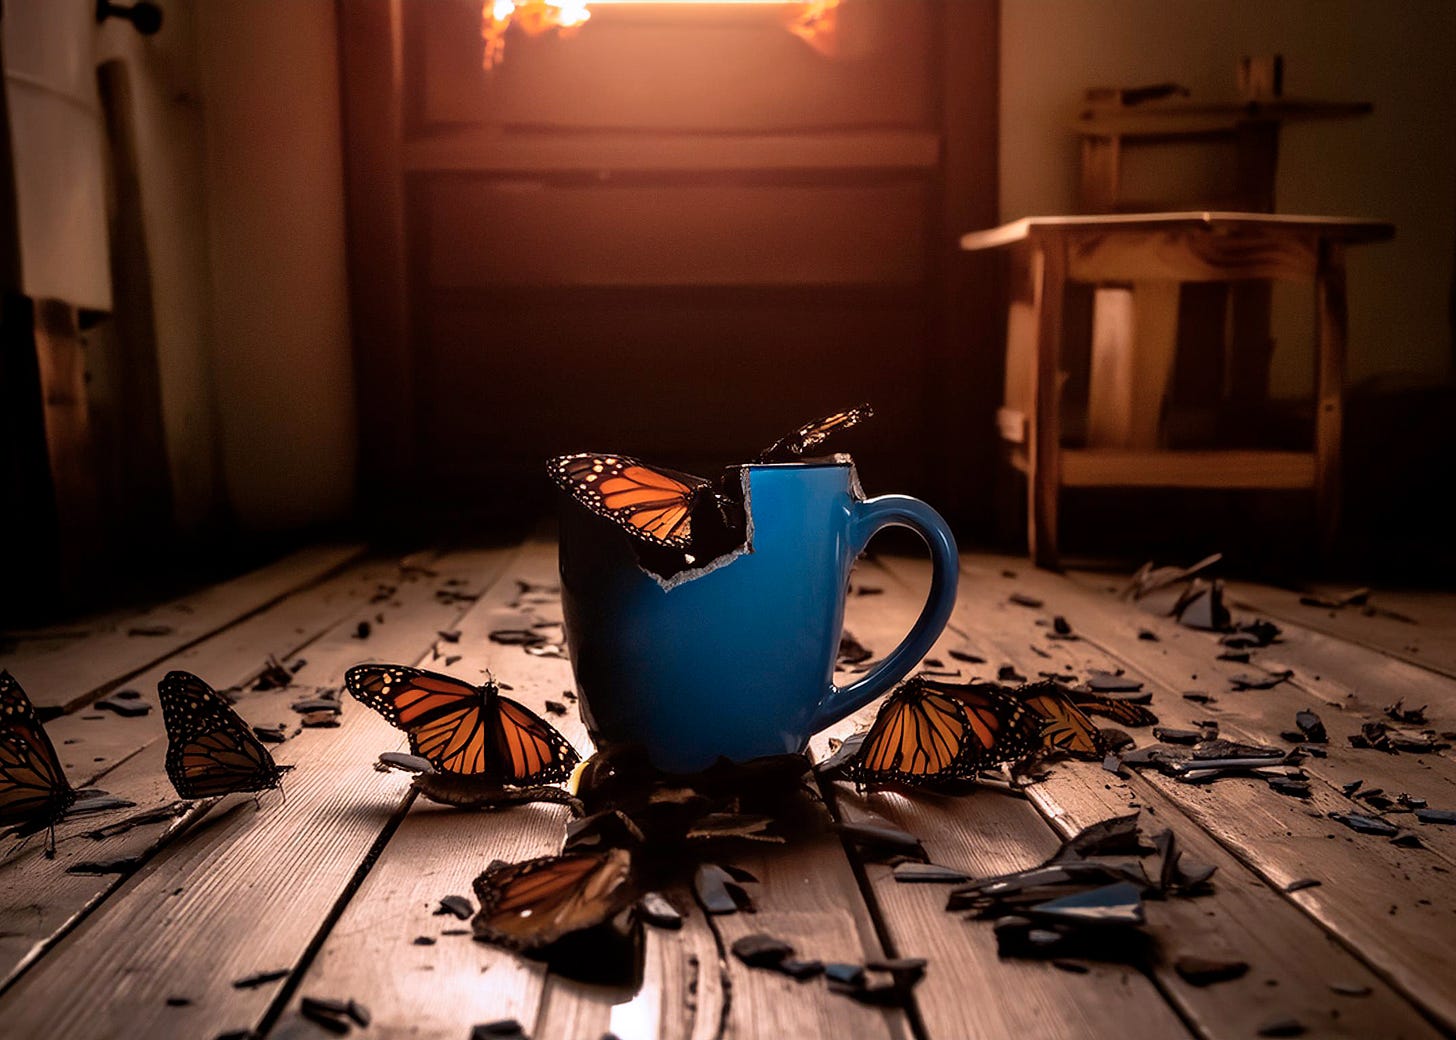 surreal image of scattered Monarch butterfly wings amidst broken blue pottery mug 